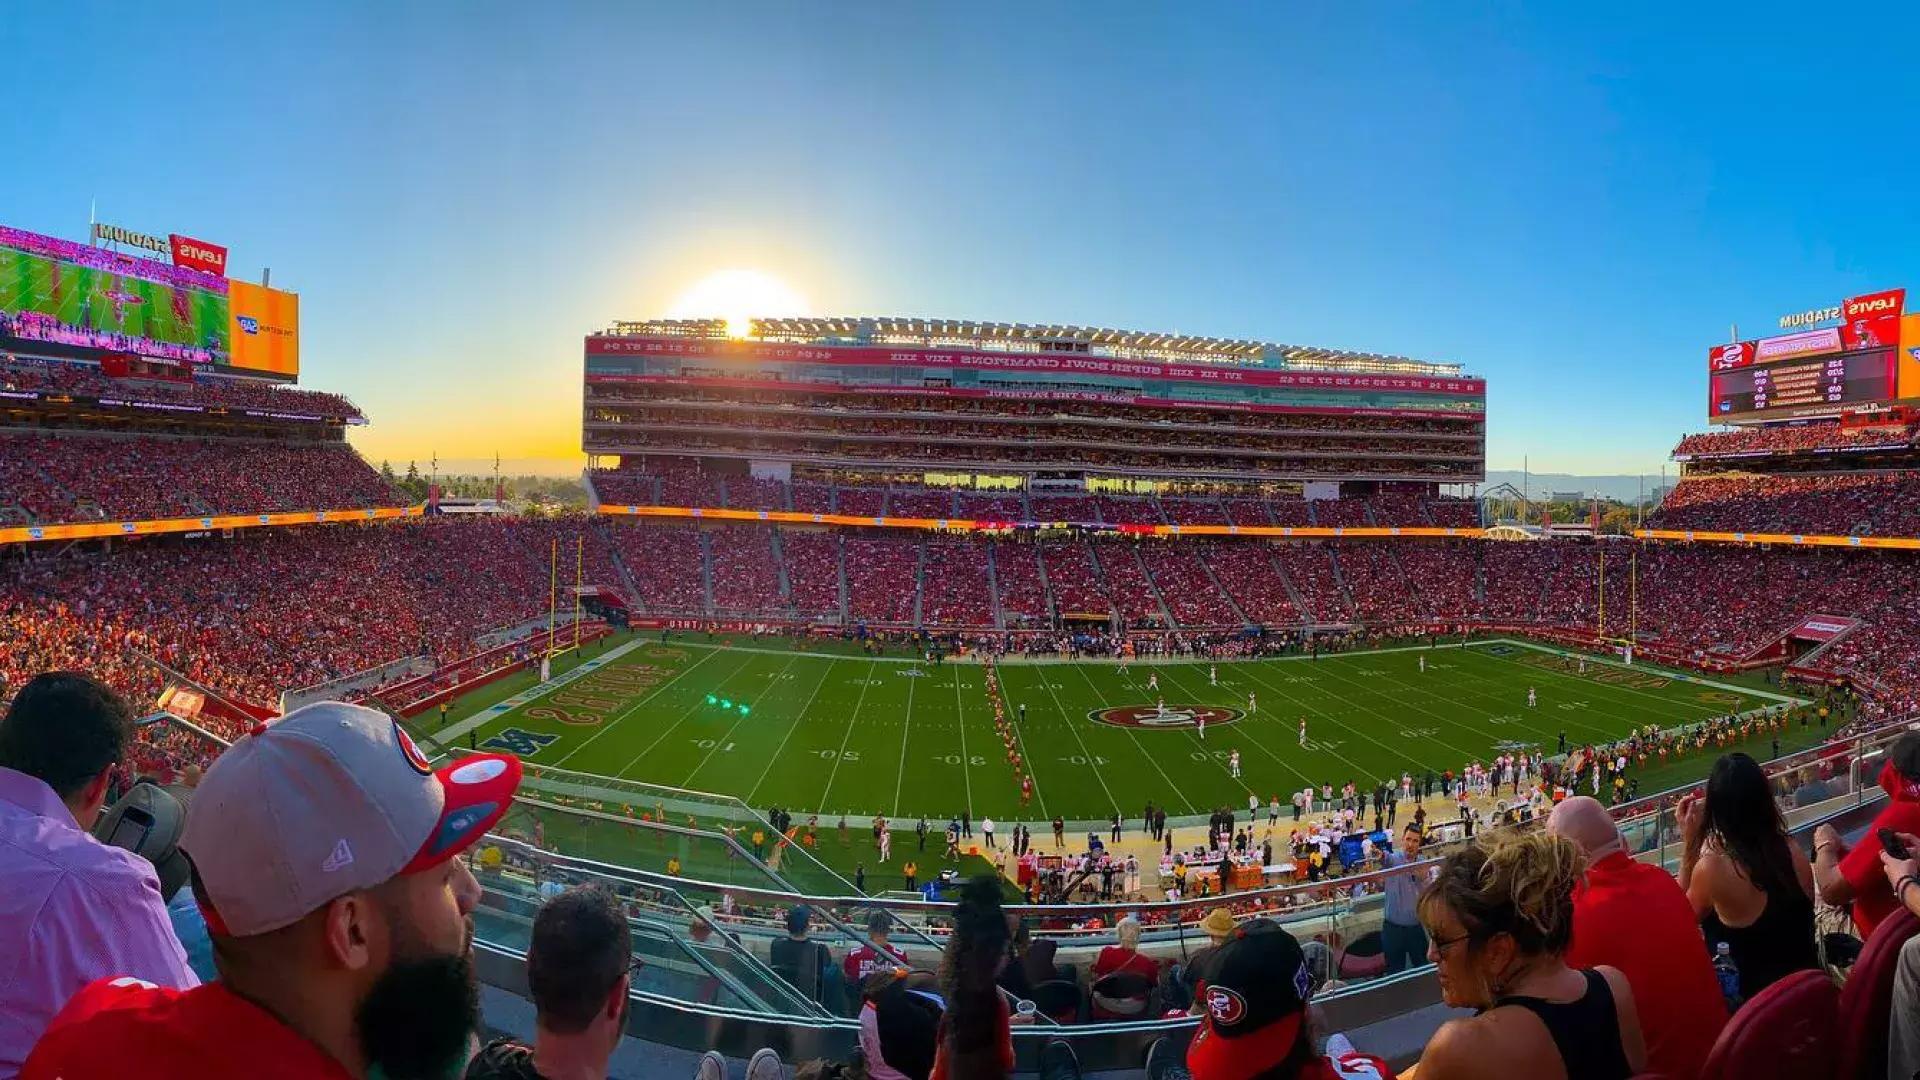 View of the football field at Levi's Stadium in Santa Clara, California, home of the San Francisco 49ers.